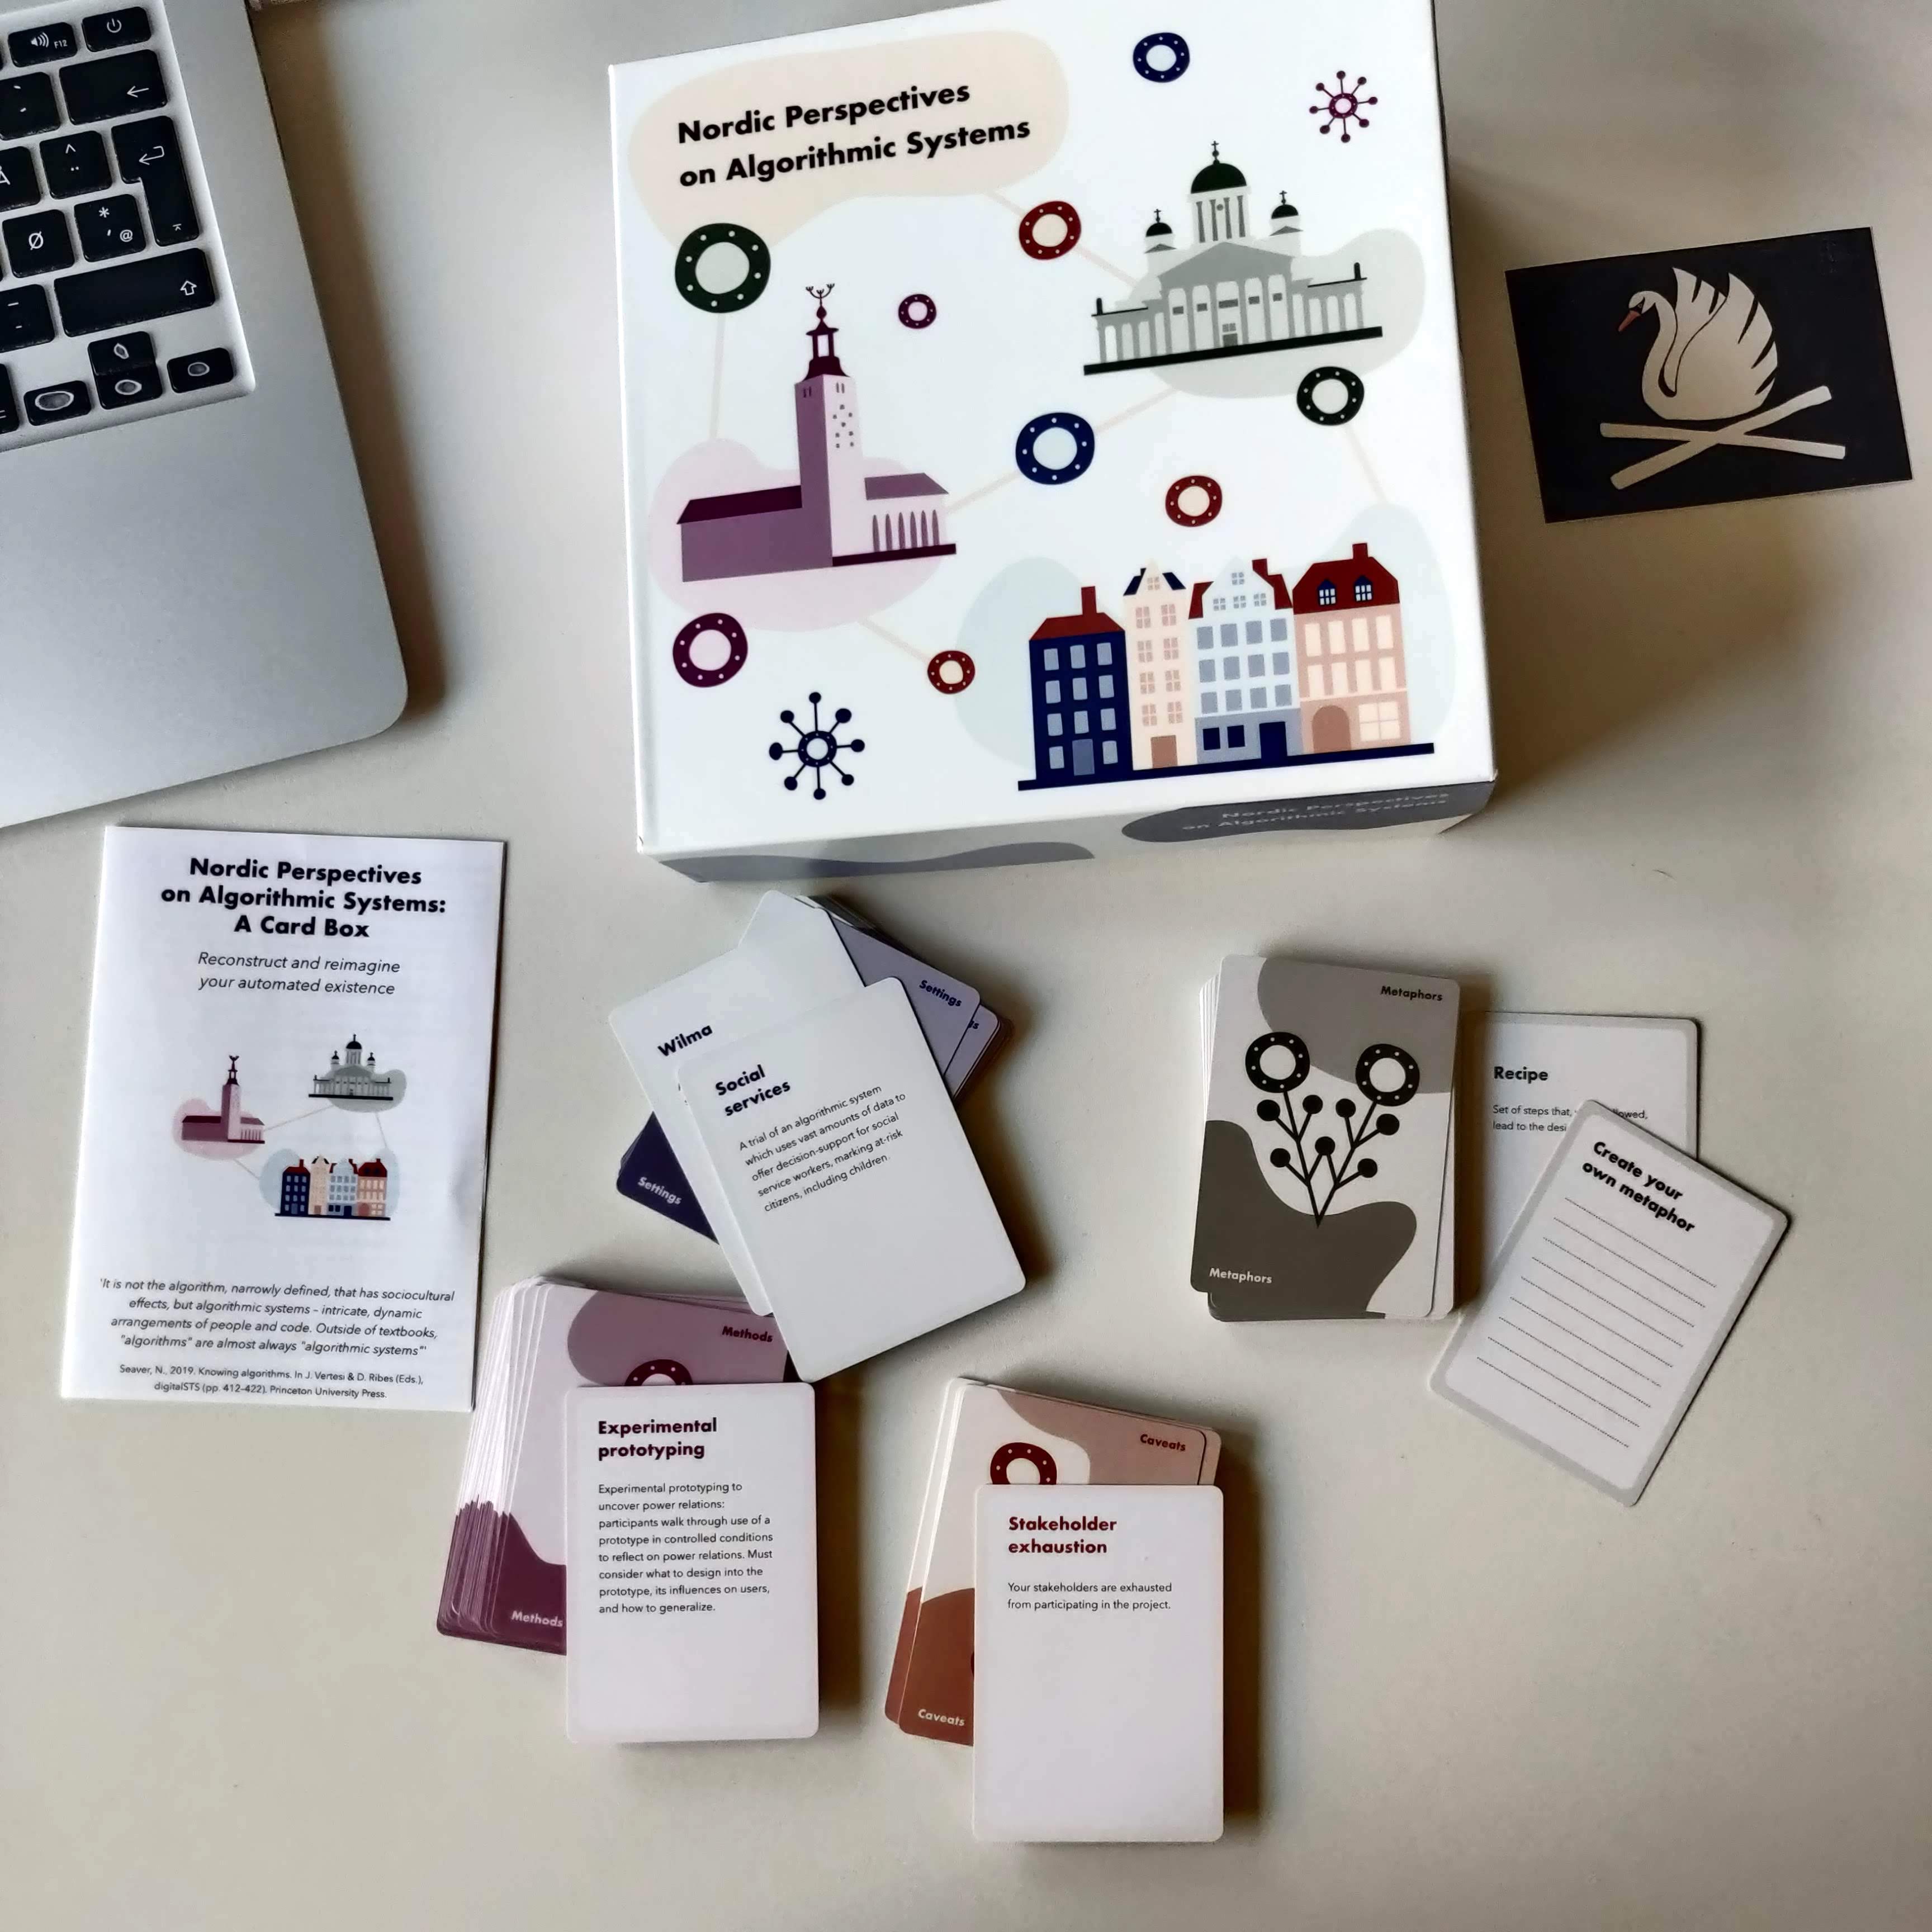 Nordic Perspectives on Algorithmic Systems card deck